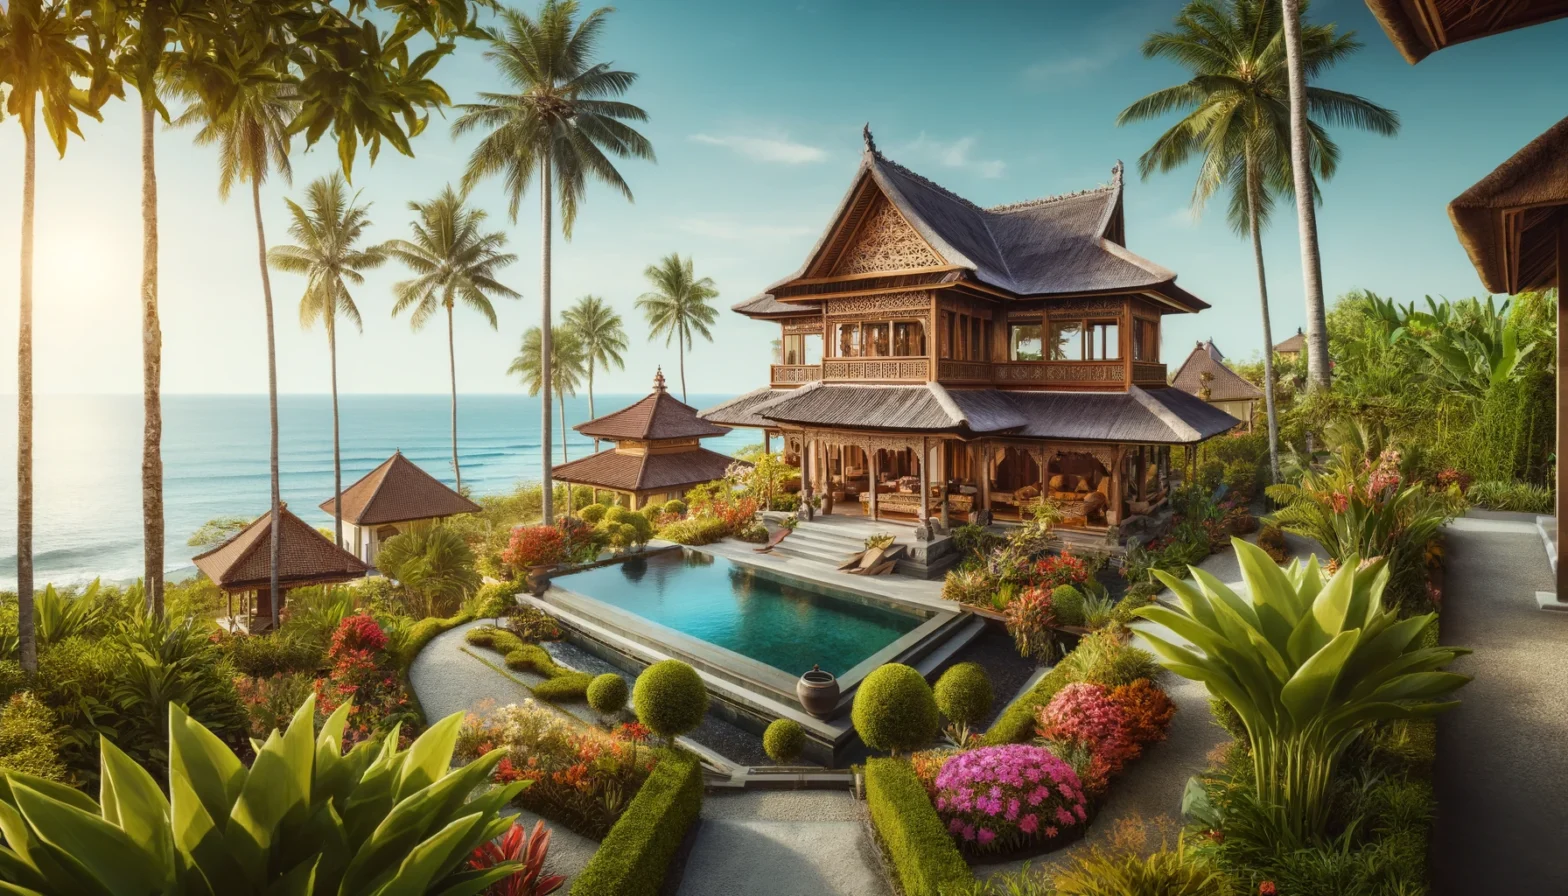 A panoramic view of a traditional Balinese villa overlooking the ocean.